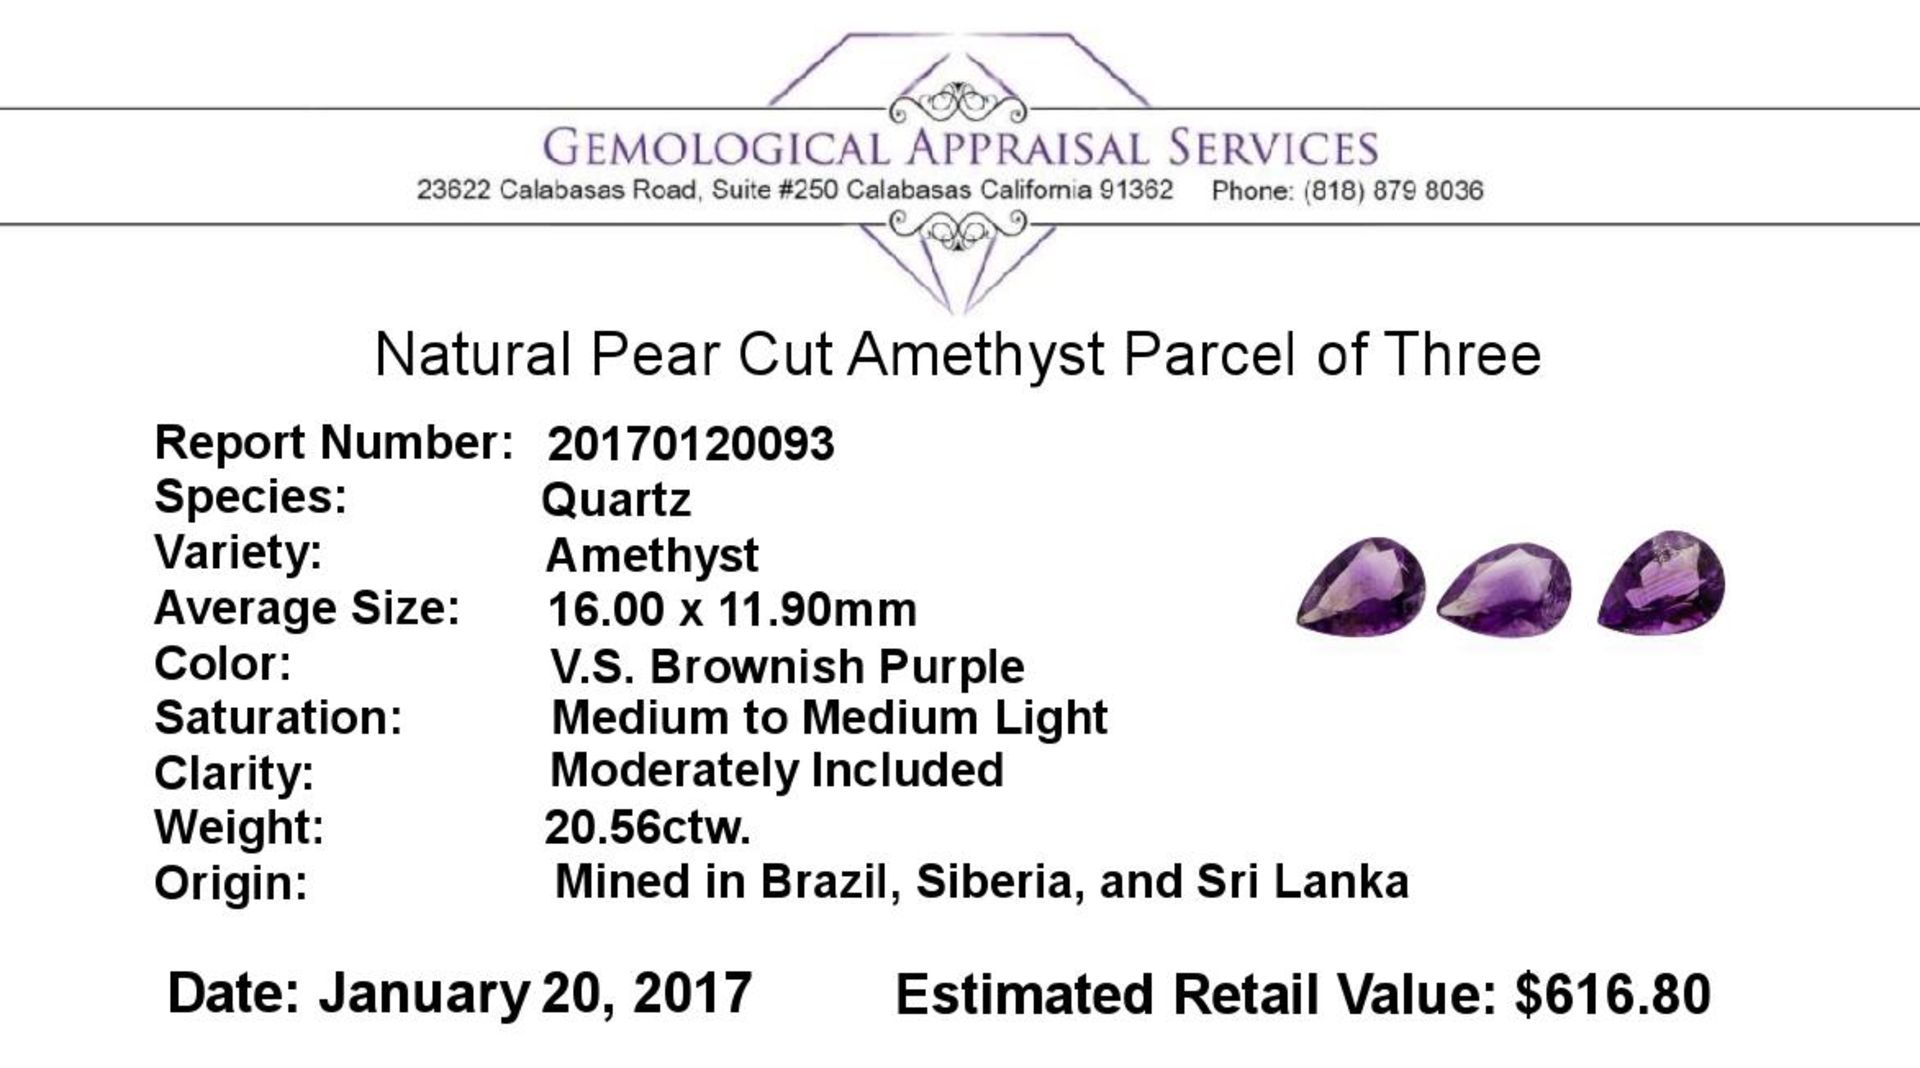 20.56ctw.Natural Pear Cut Amethyst Parcel of Three - Image 3 of 3